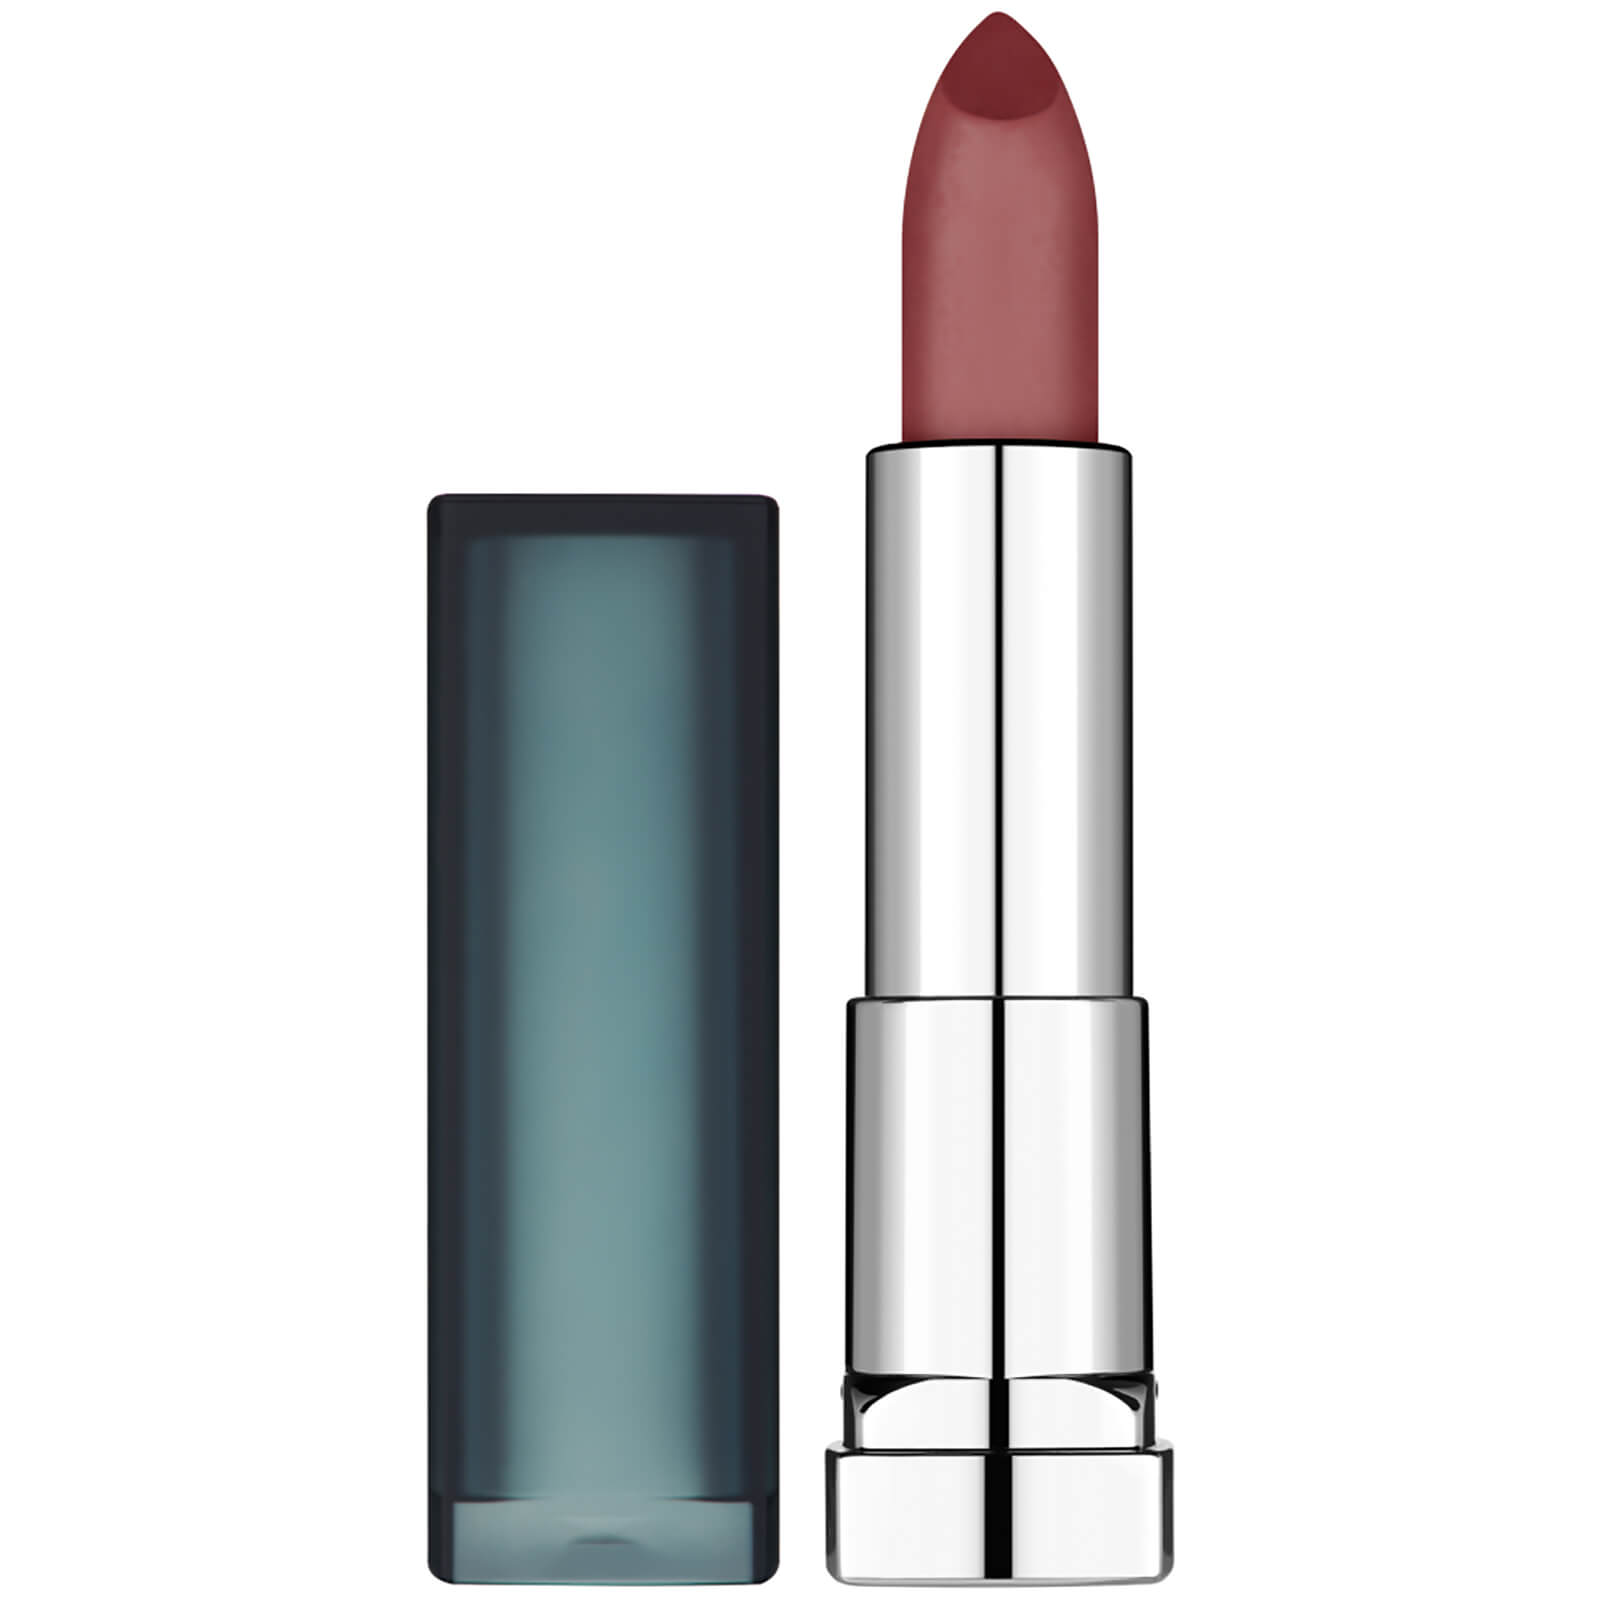 Maybelline Colour Sensational Lipstick Matte Nude (Various Shades) - 0 Toasted Burn